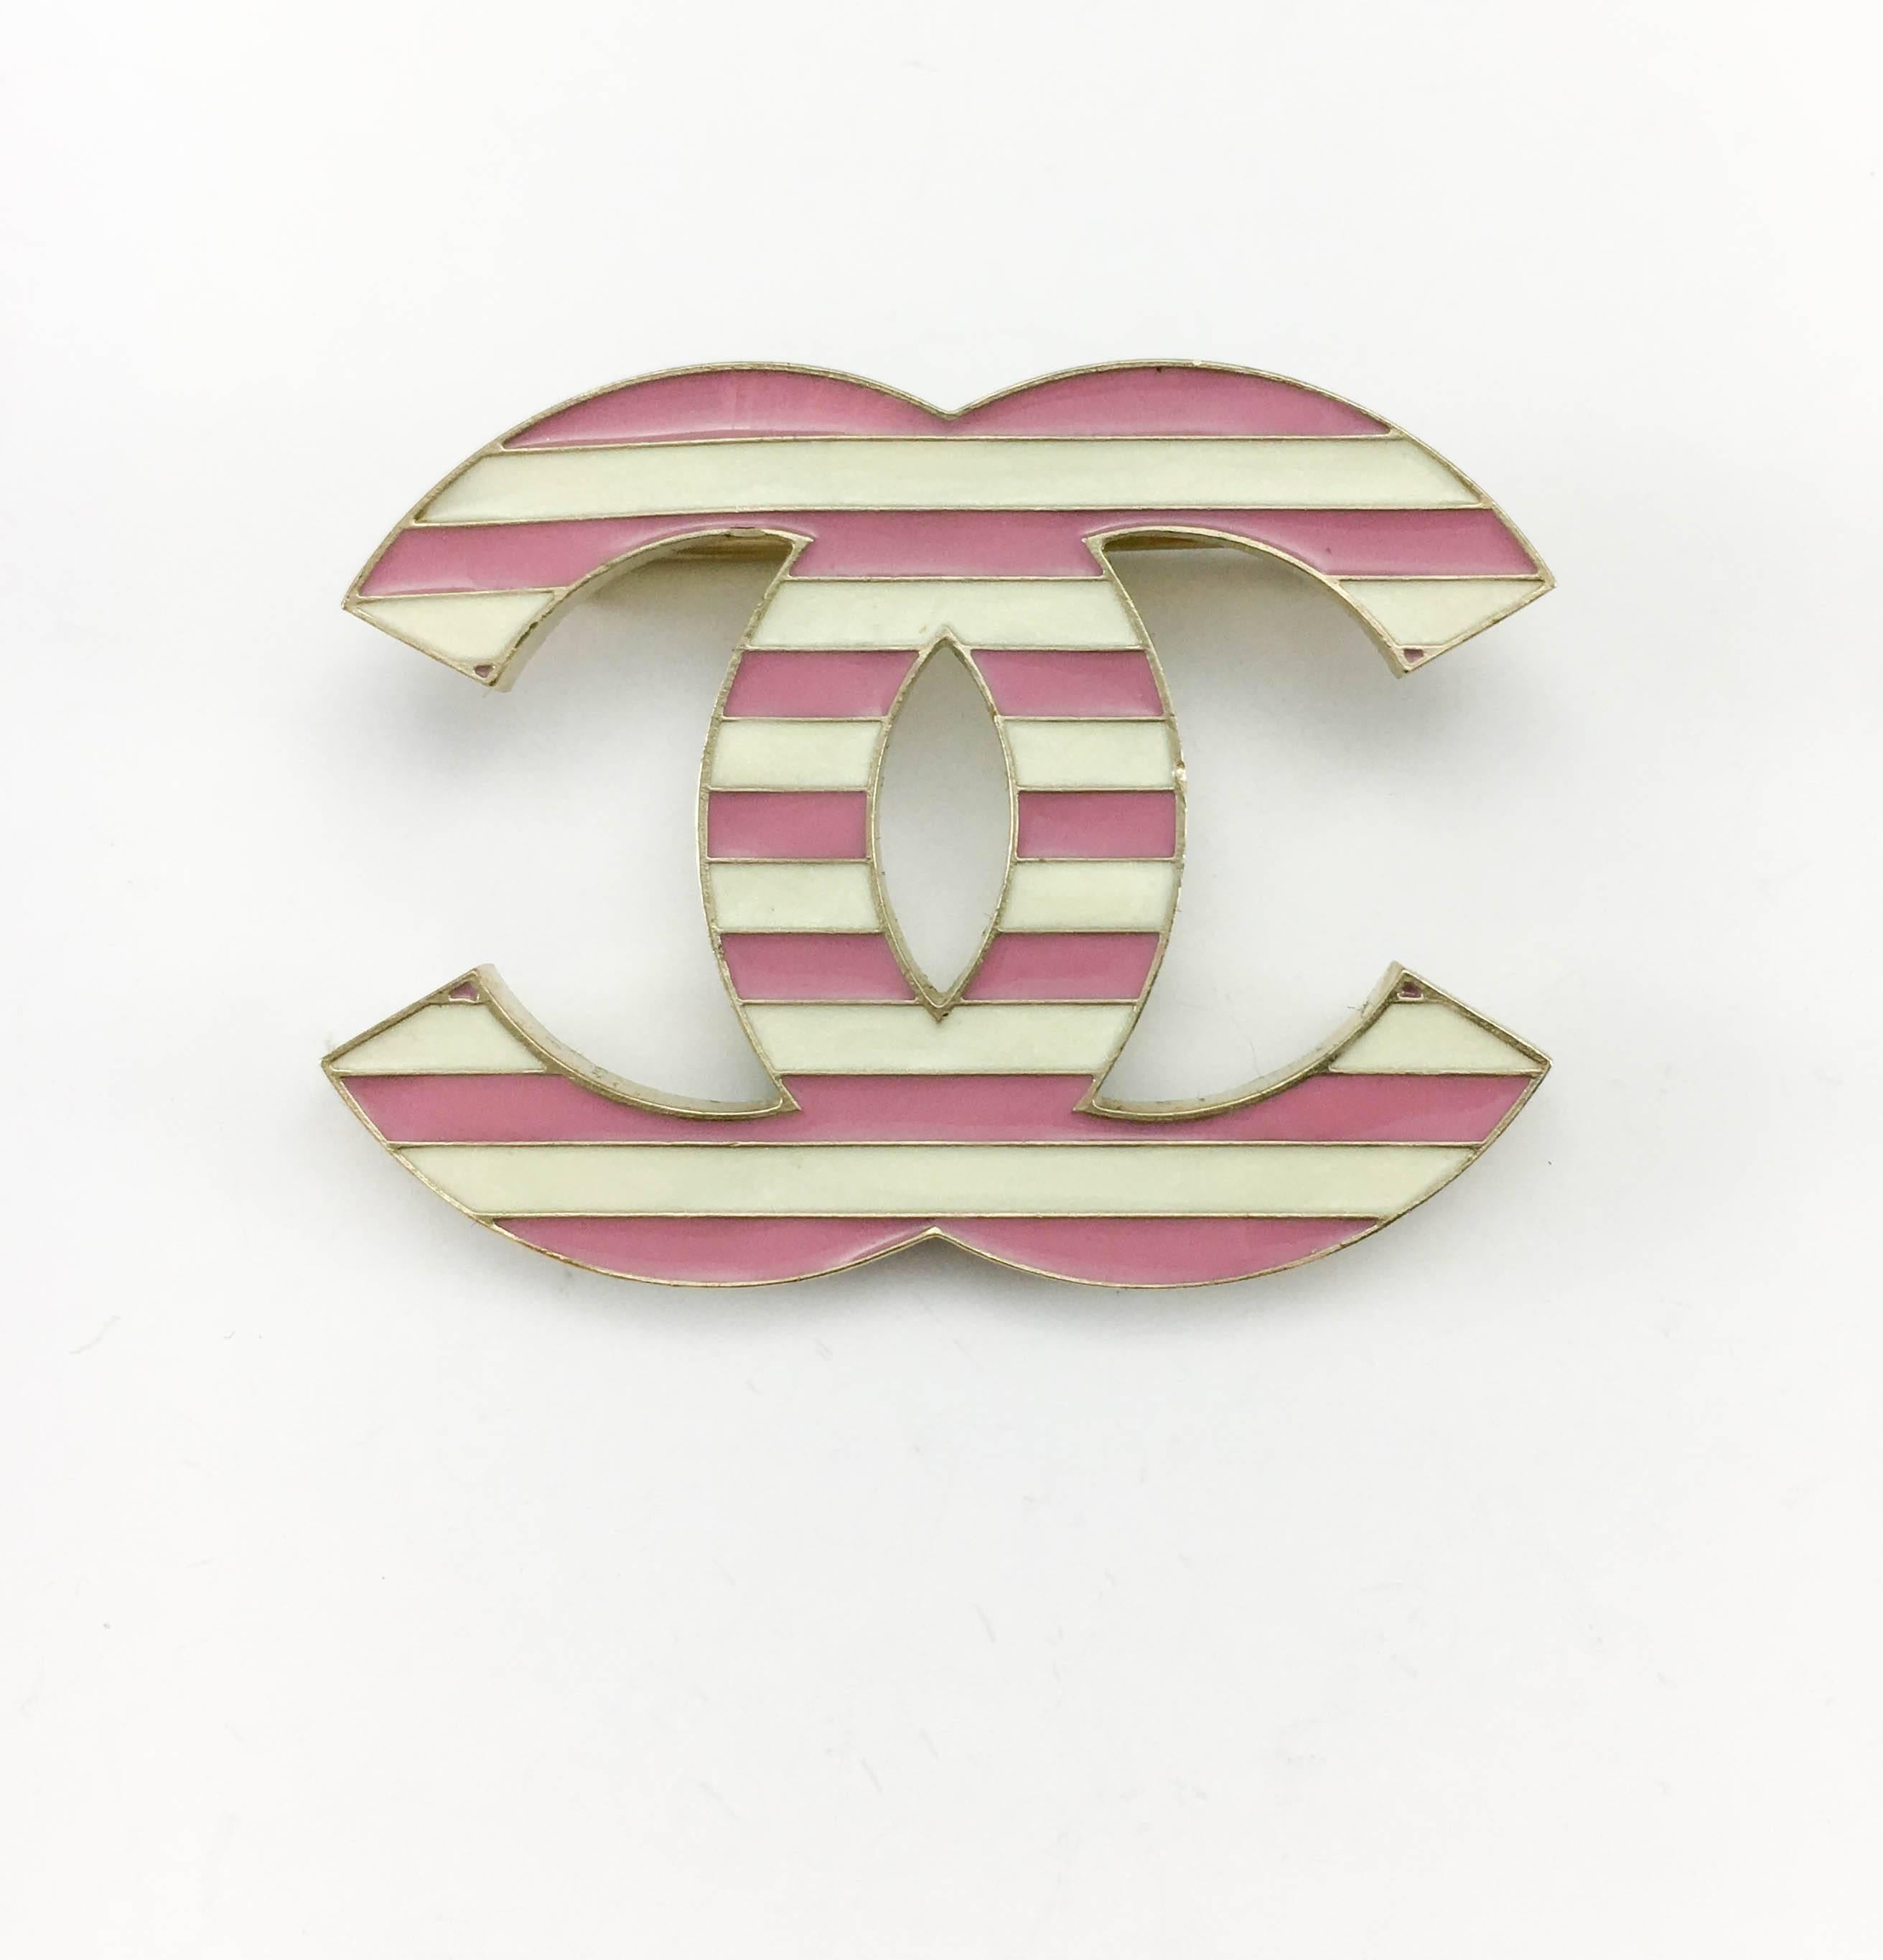 This pretty brooch by Chanel is part of the 2013 Cruise Collection. In the shape of the iconic ‘CC’ logo, it features pink and white enamelled stripes. The back and side of the brooch are made in matte gilt metal. Chanel signed on the back, it comes